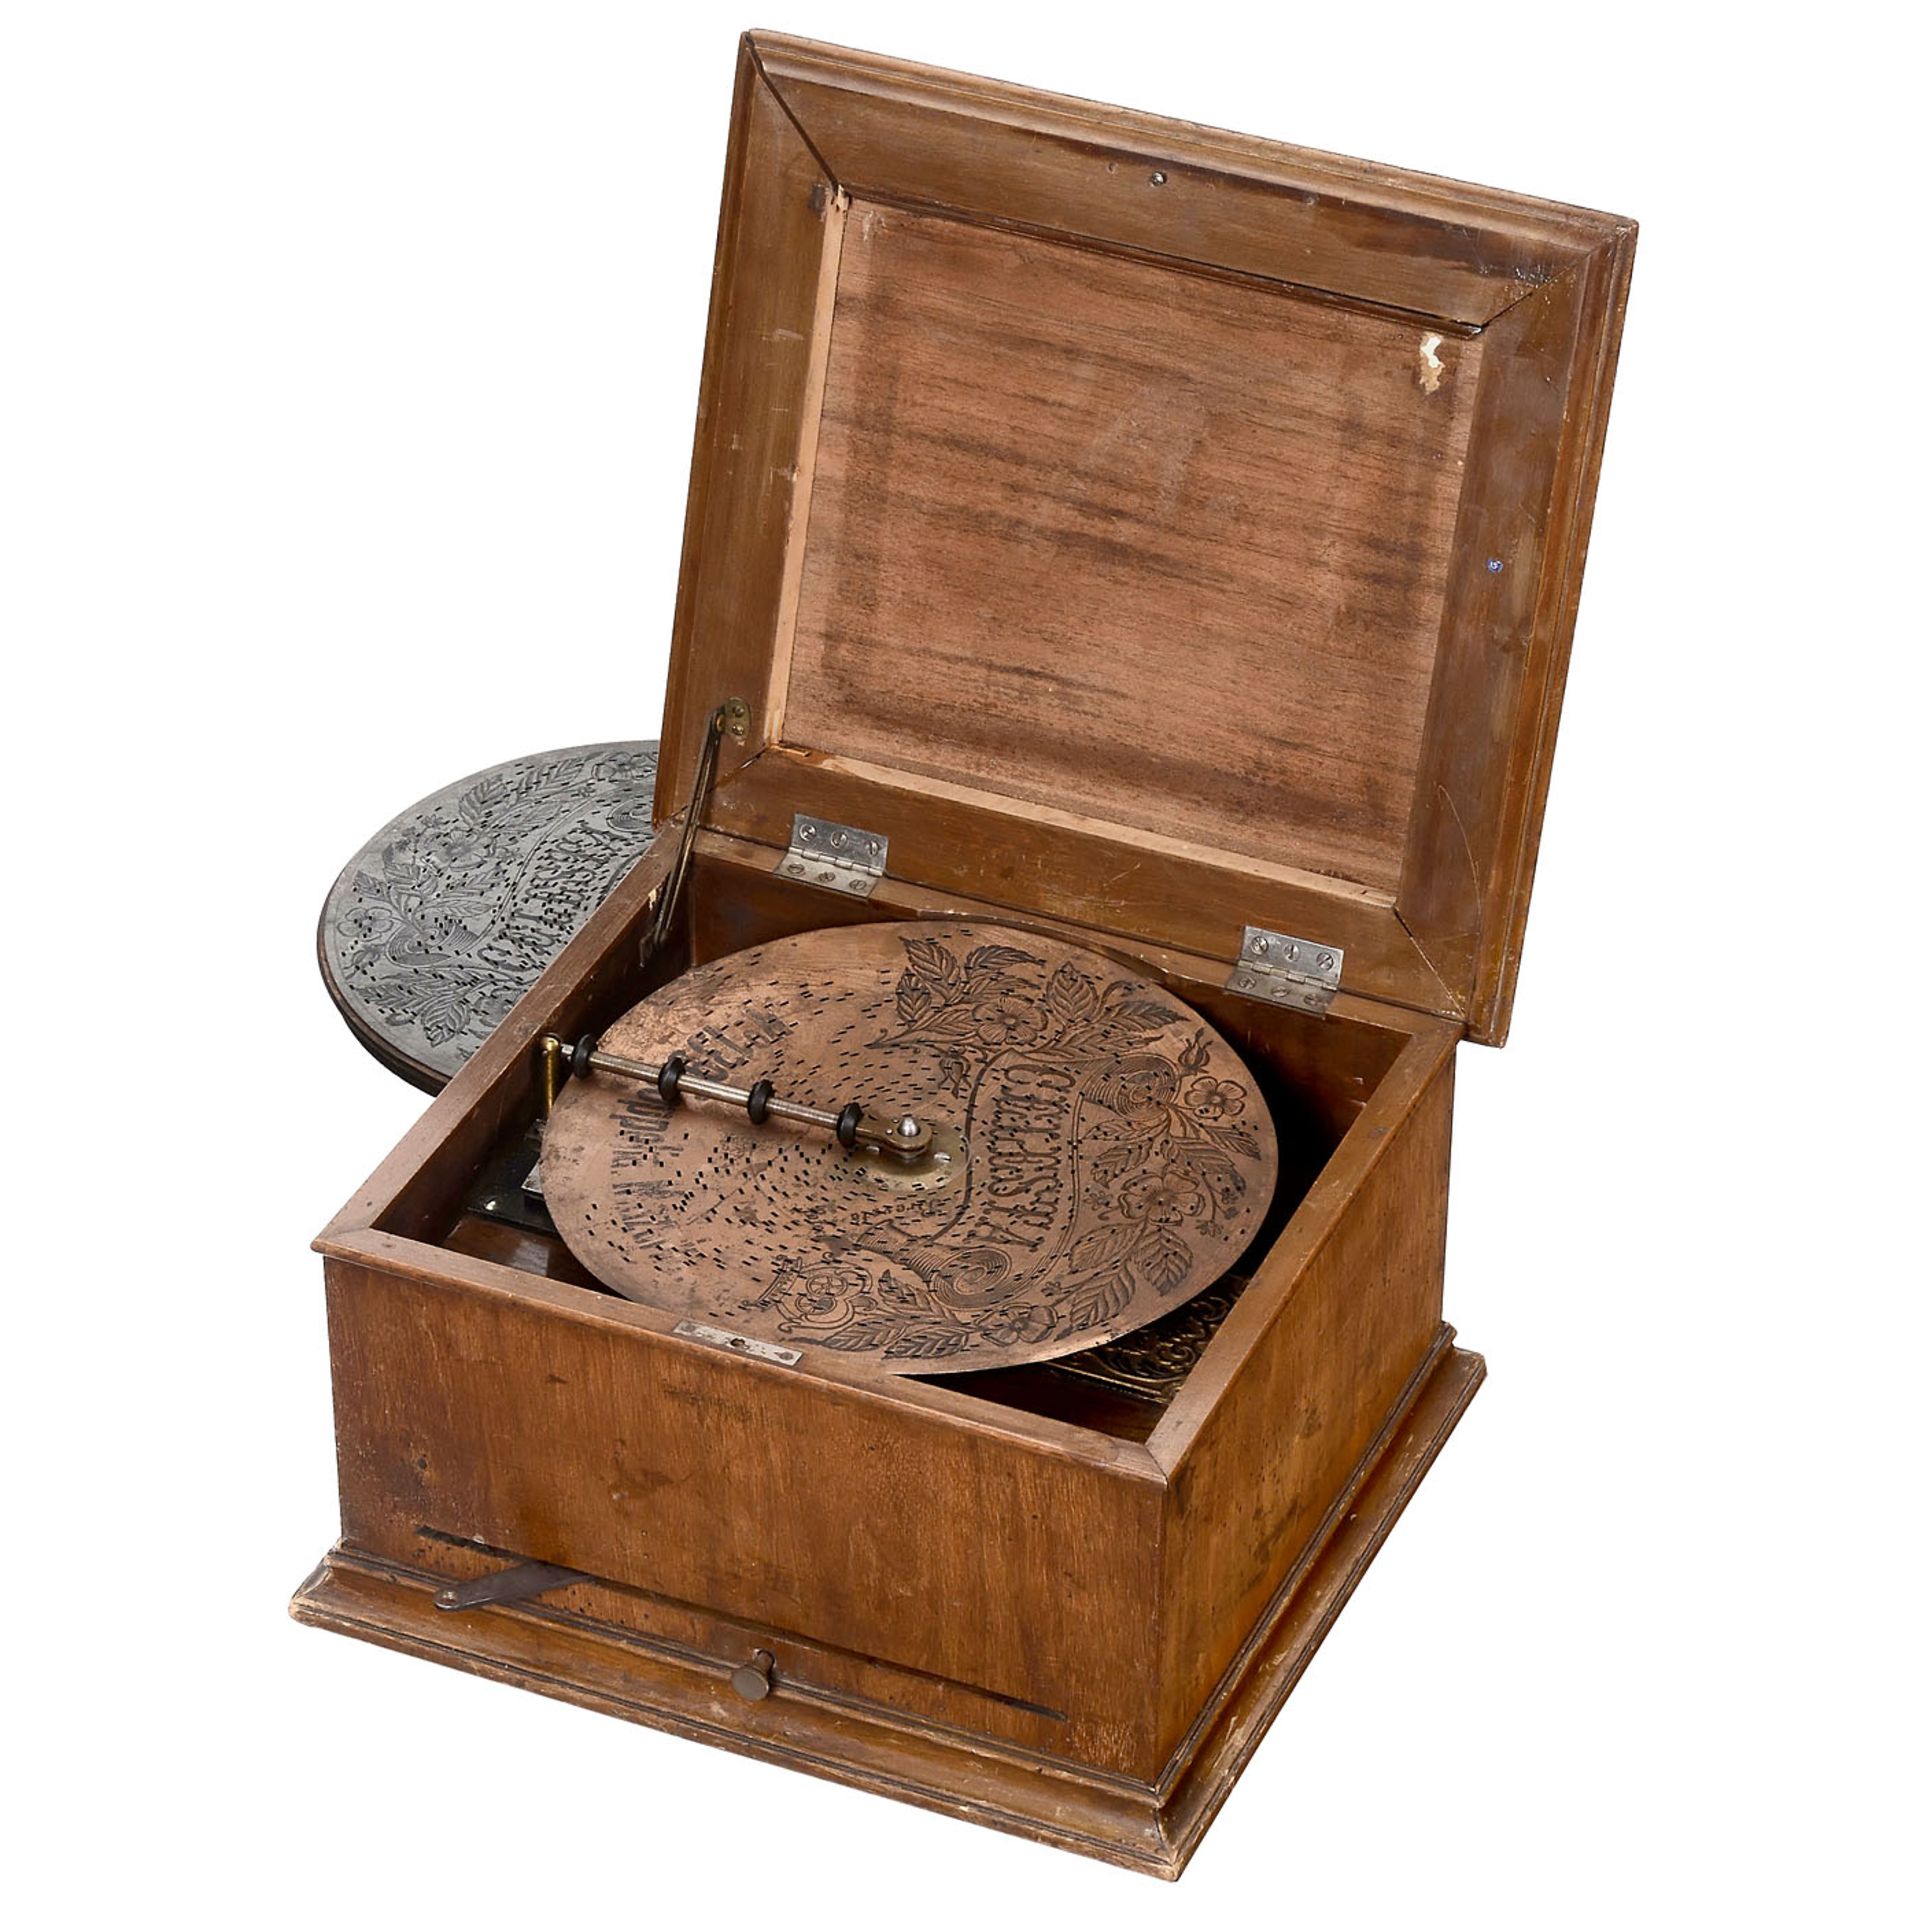 3 Disc Musical Box, c. 1900 - Image 2 of 7